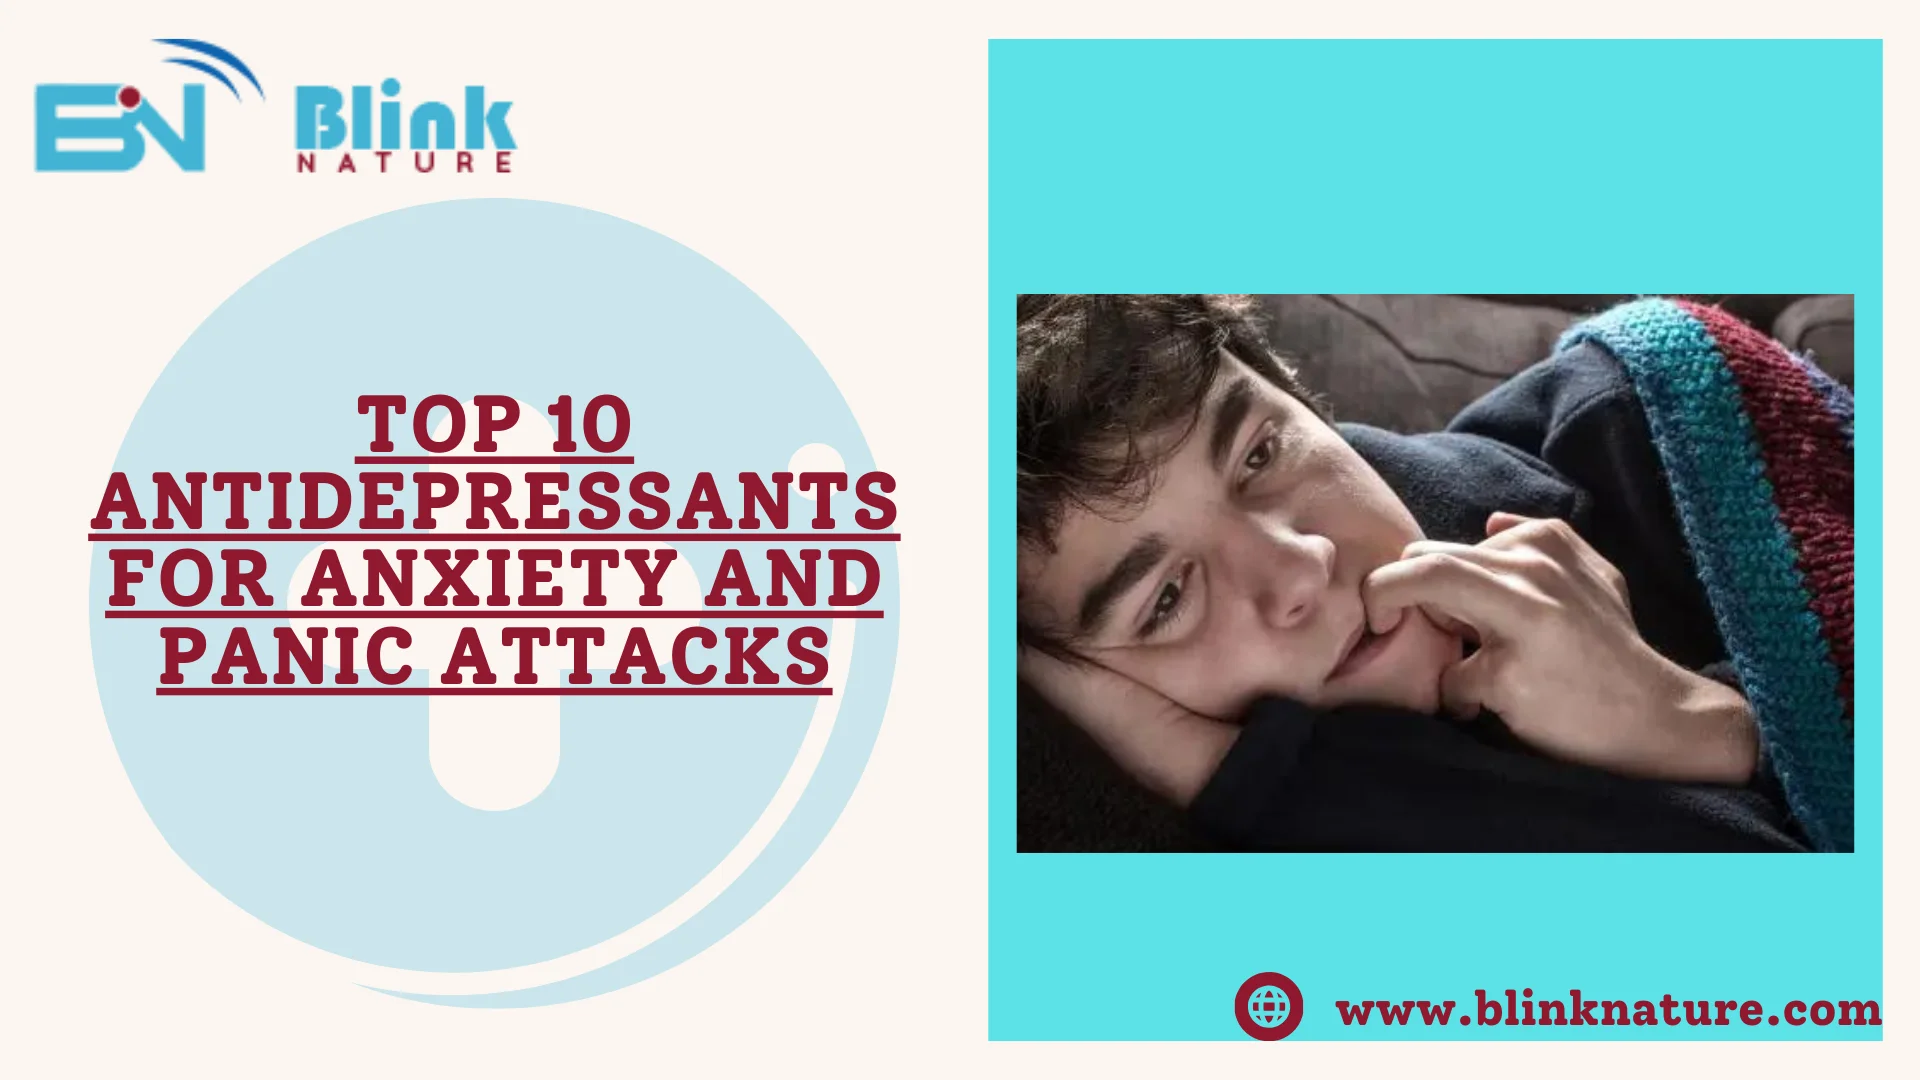 TOP 10 ANTIDEPRESSANTS FOR ANXIETY AND PANIC ATTACKS